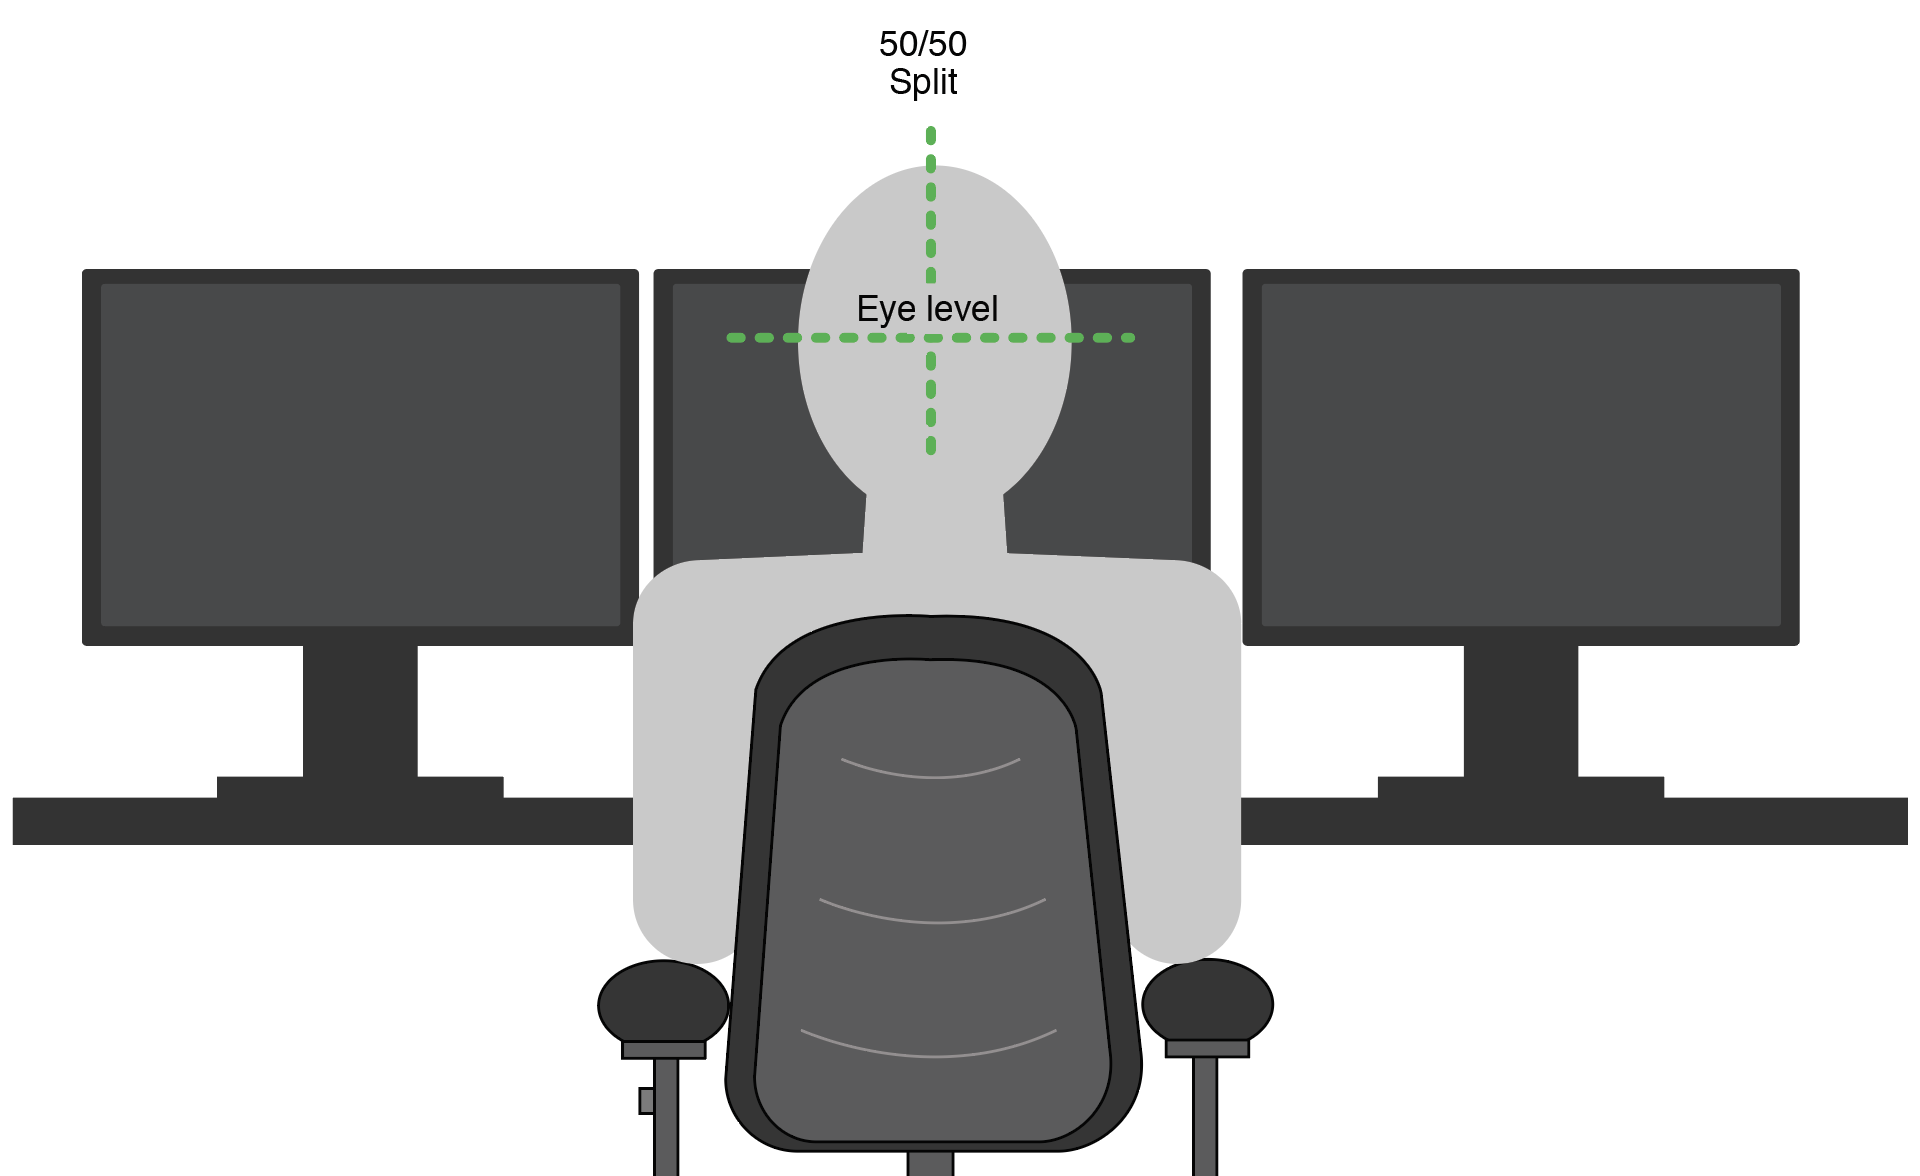 An illustration showing optimum monitors placement and position when multiple monitors are required